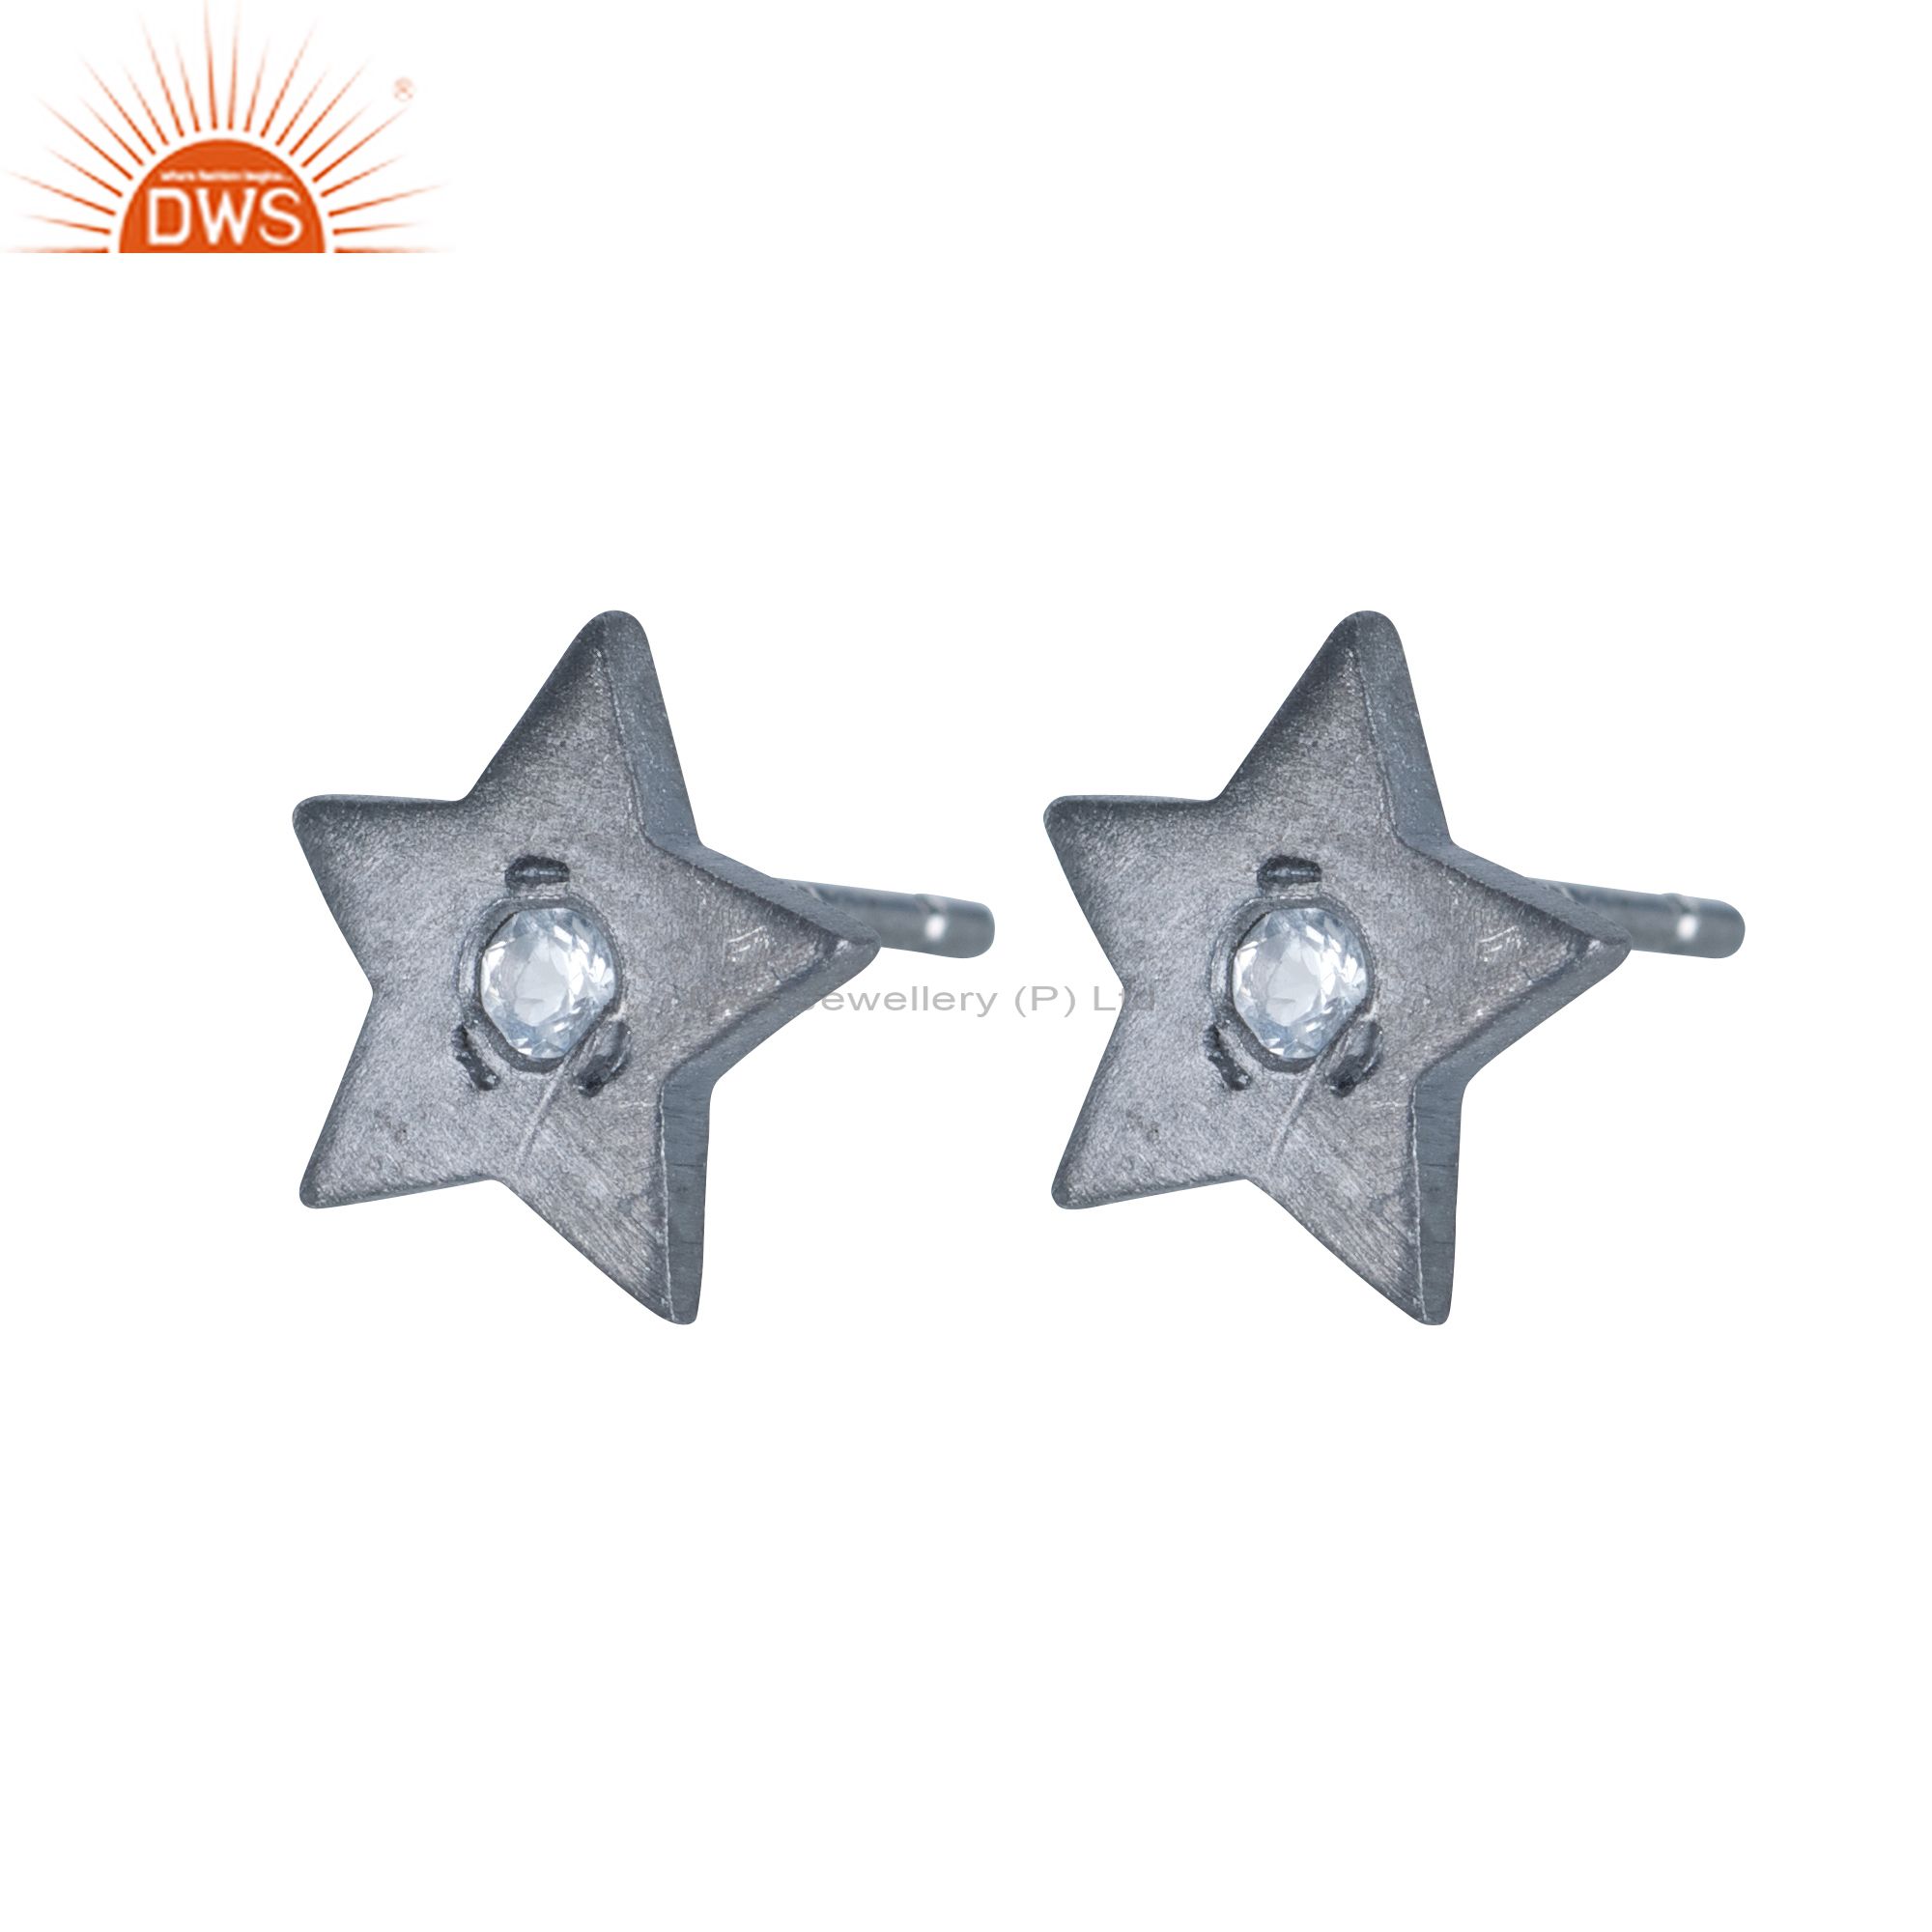 Black Rhodium Plated Sterling Silver Star Design Stud Earrings With White Topaz